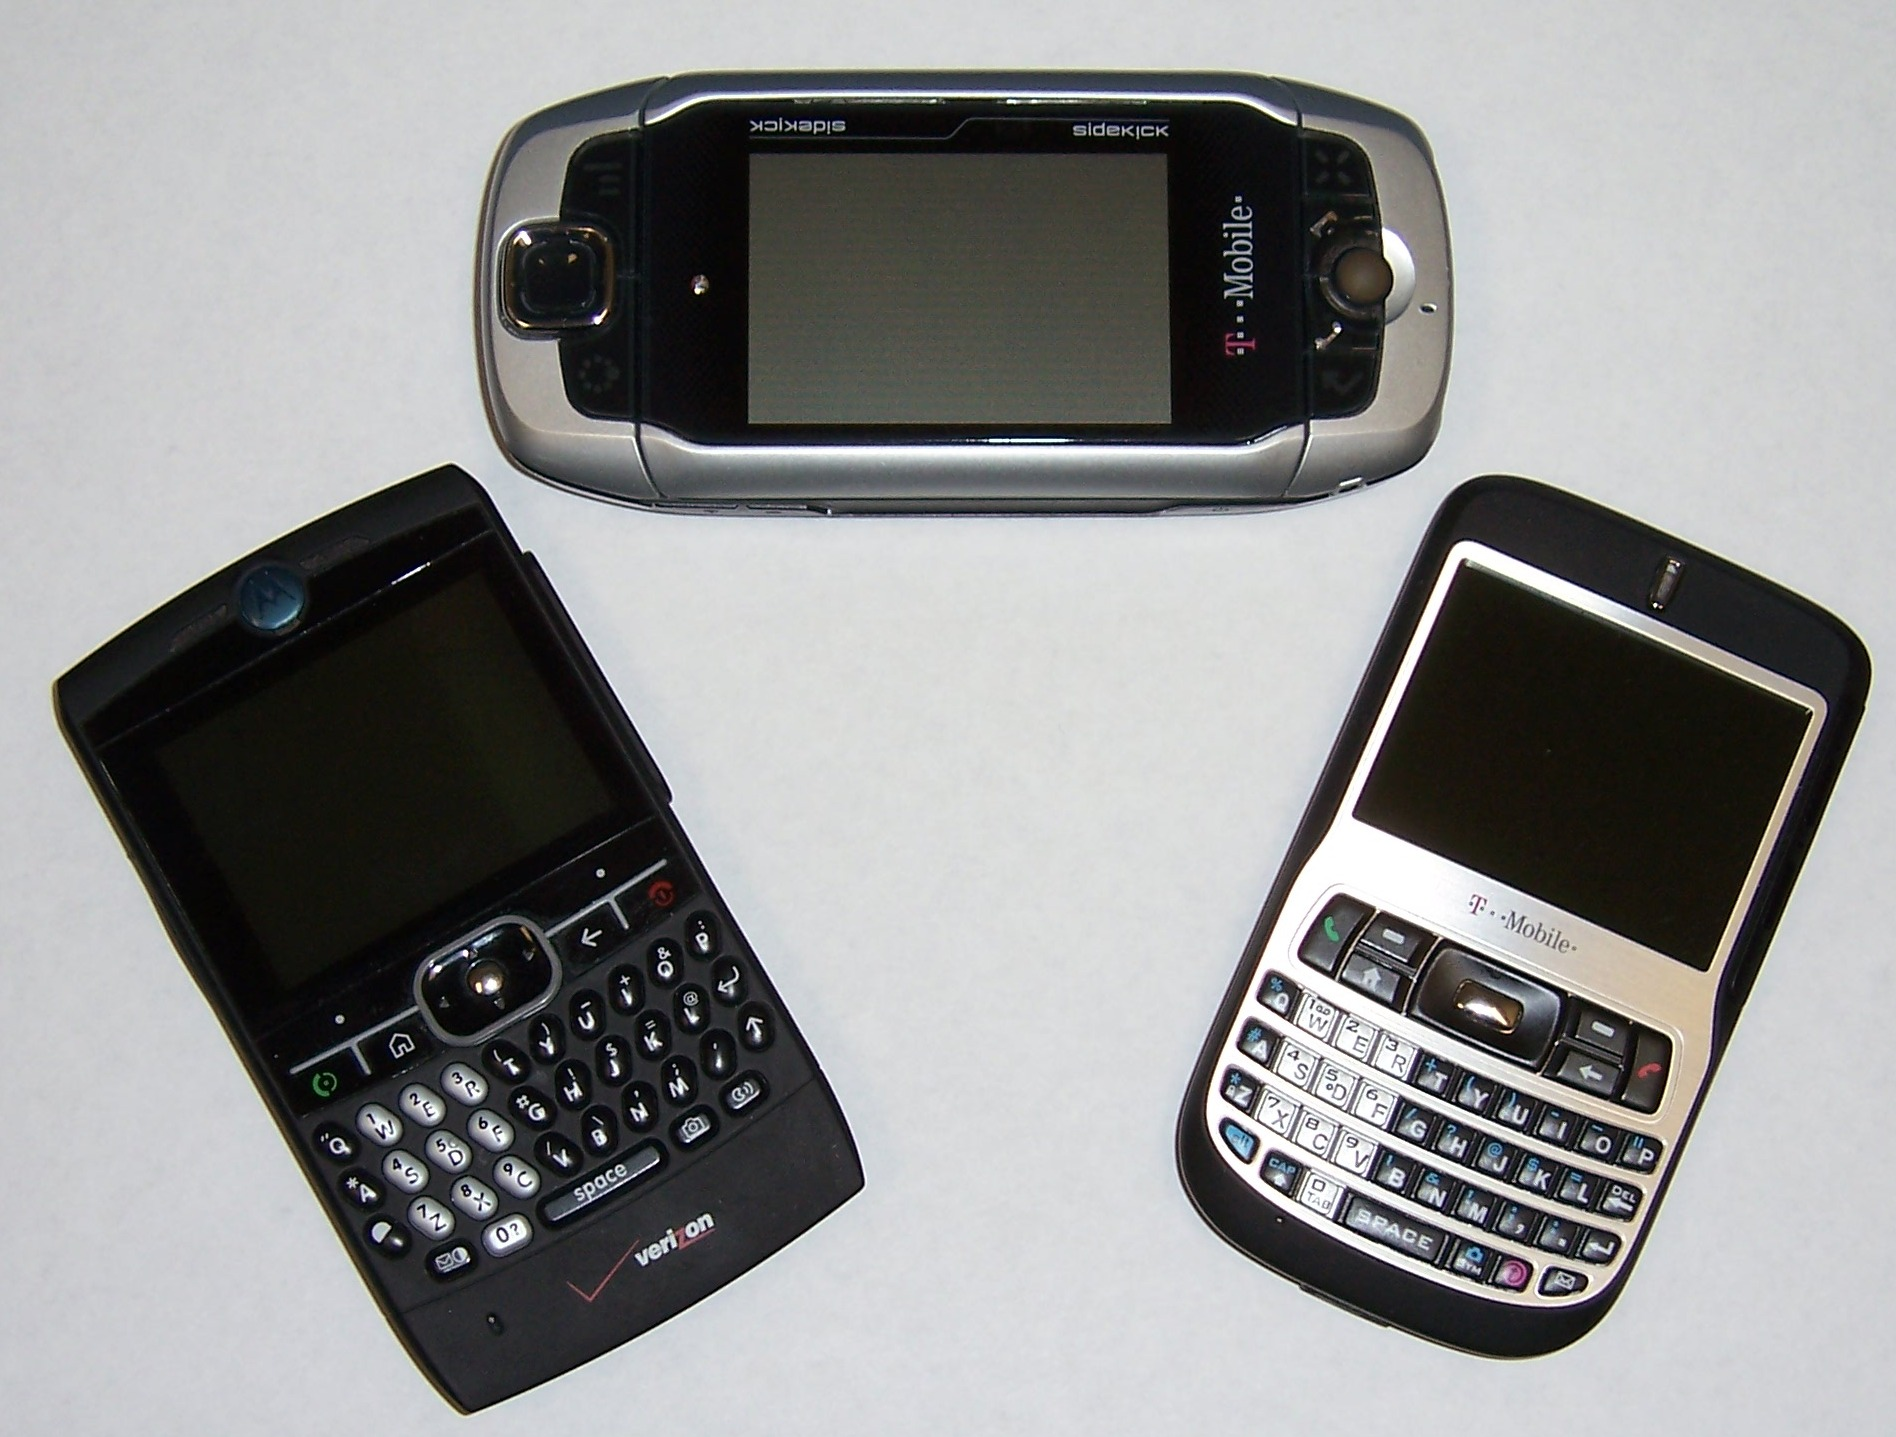 Image of 3 different wireless devices.